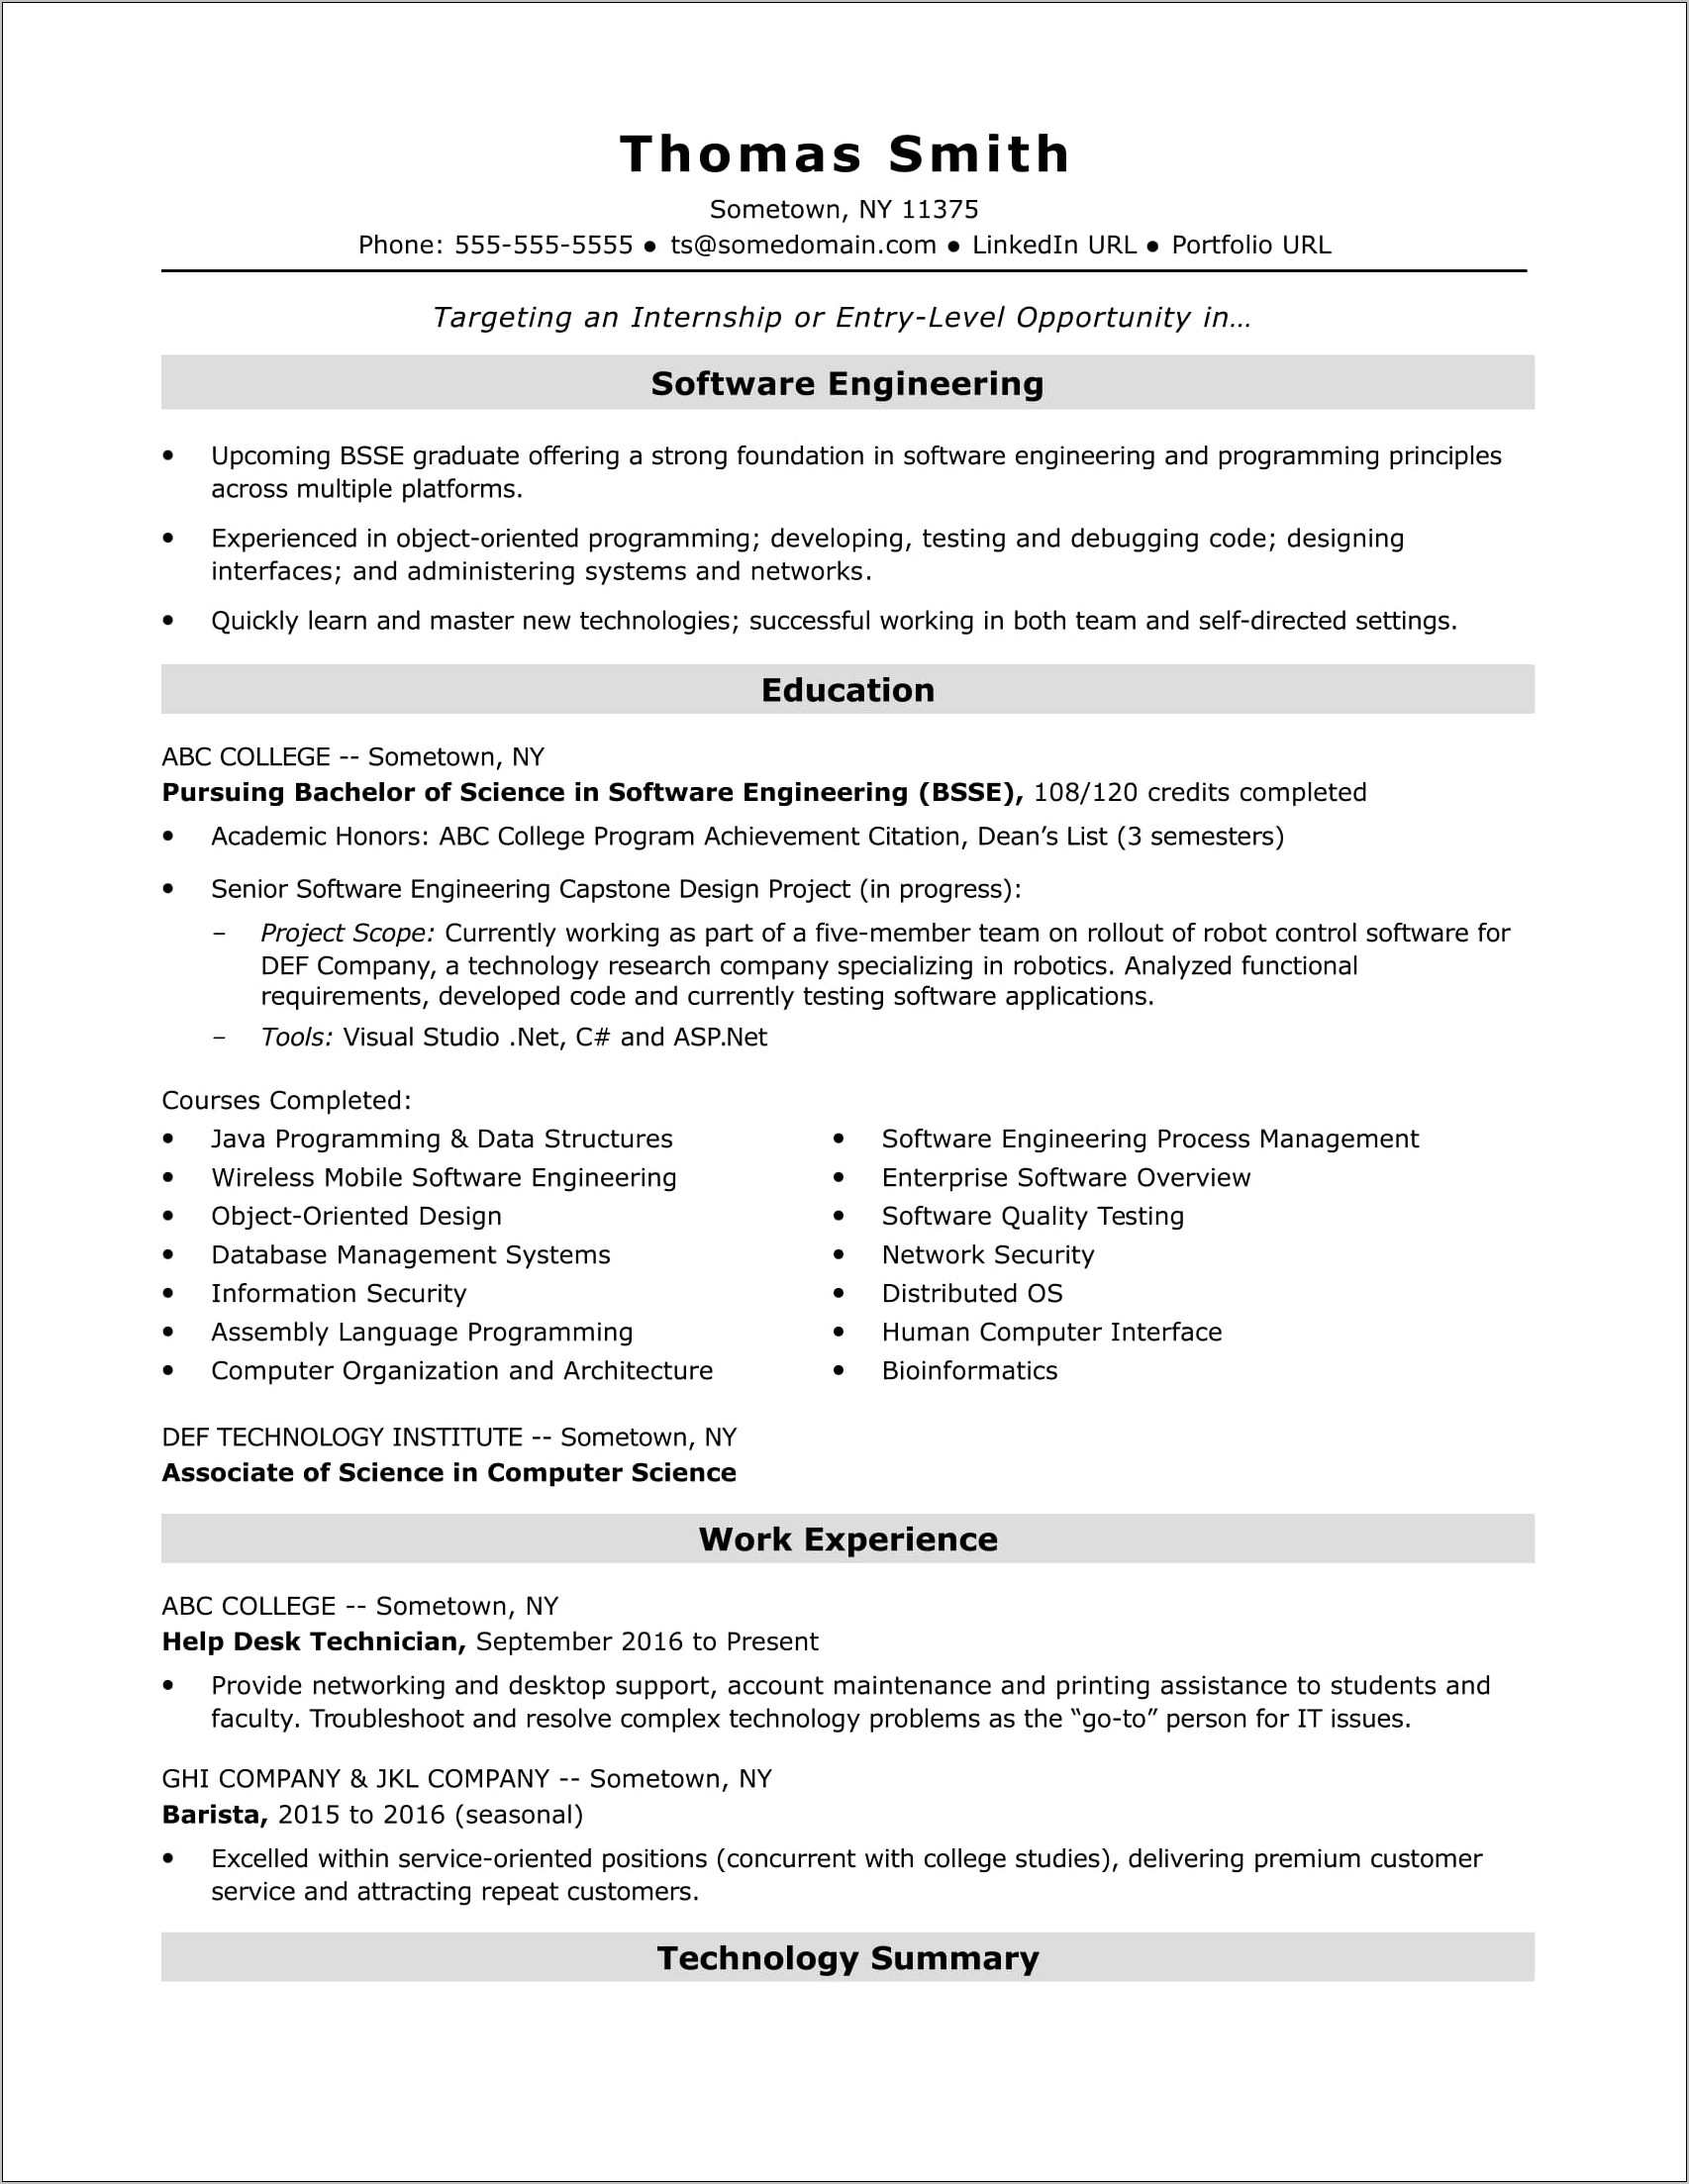 Graduate Student With Some Experience Resume Summary